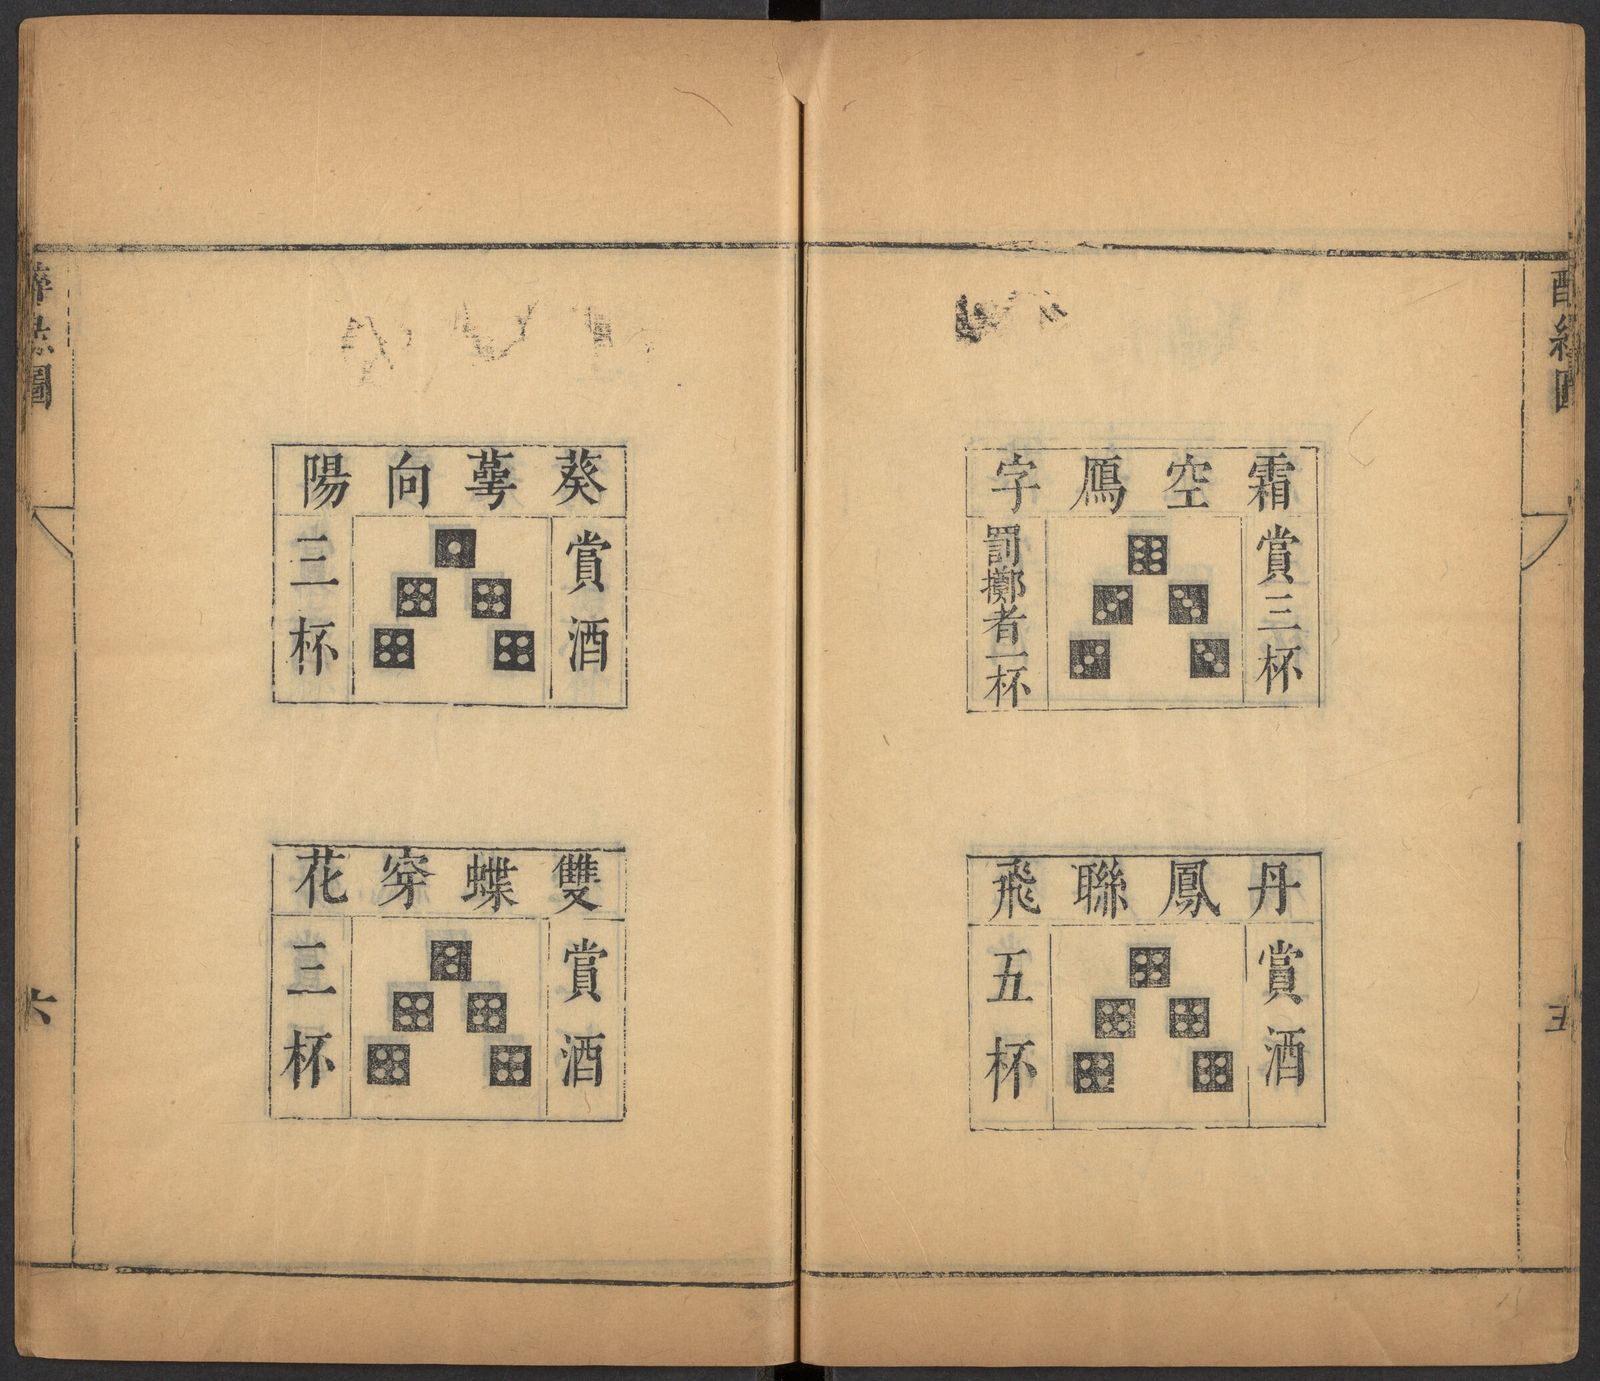 Pages from a book with four diagrams of dice rolls in pictorial form and Chinese writing around each diagram indicating the name and outcome of the roll.